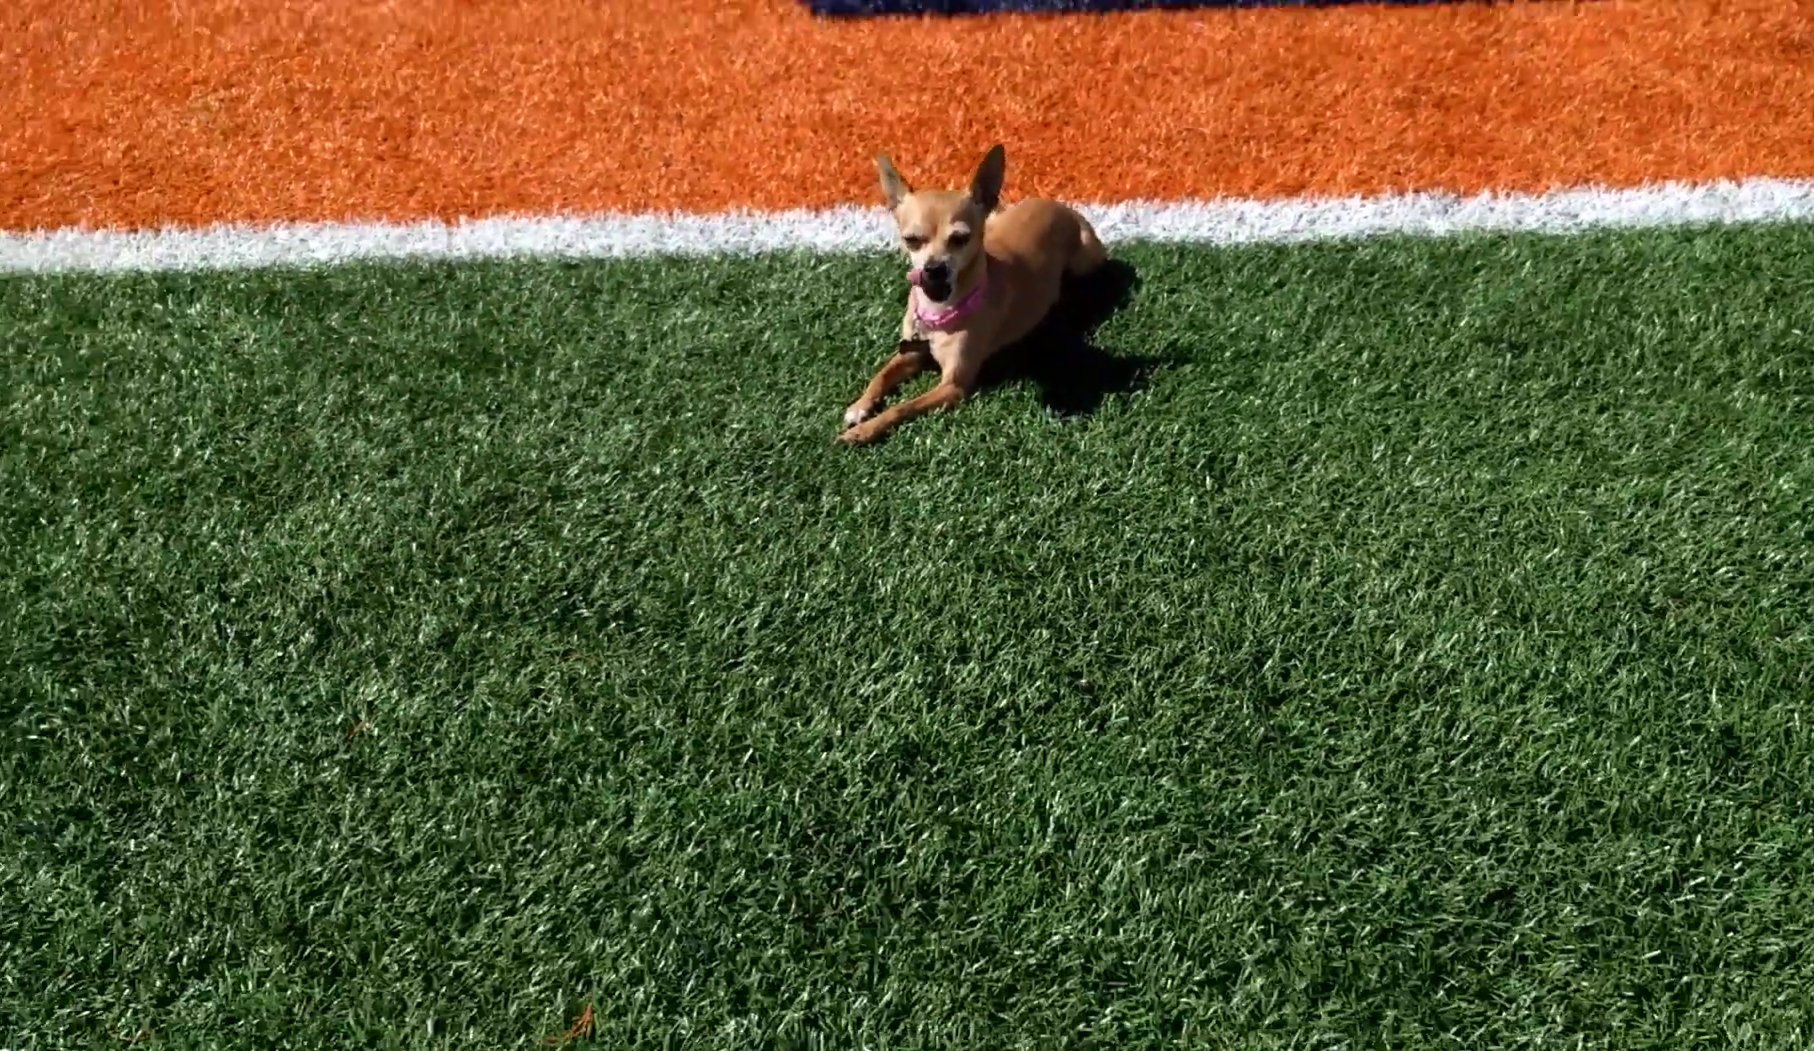 How can you train a Chihuahua to run faster?